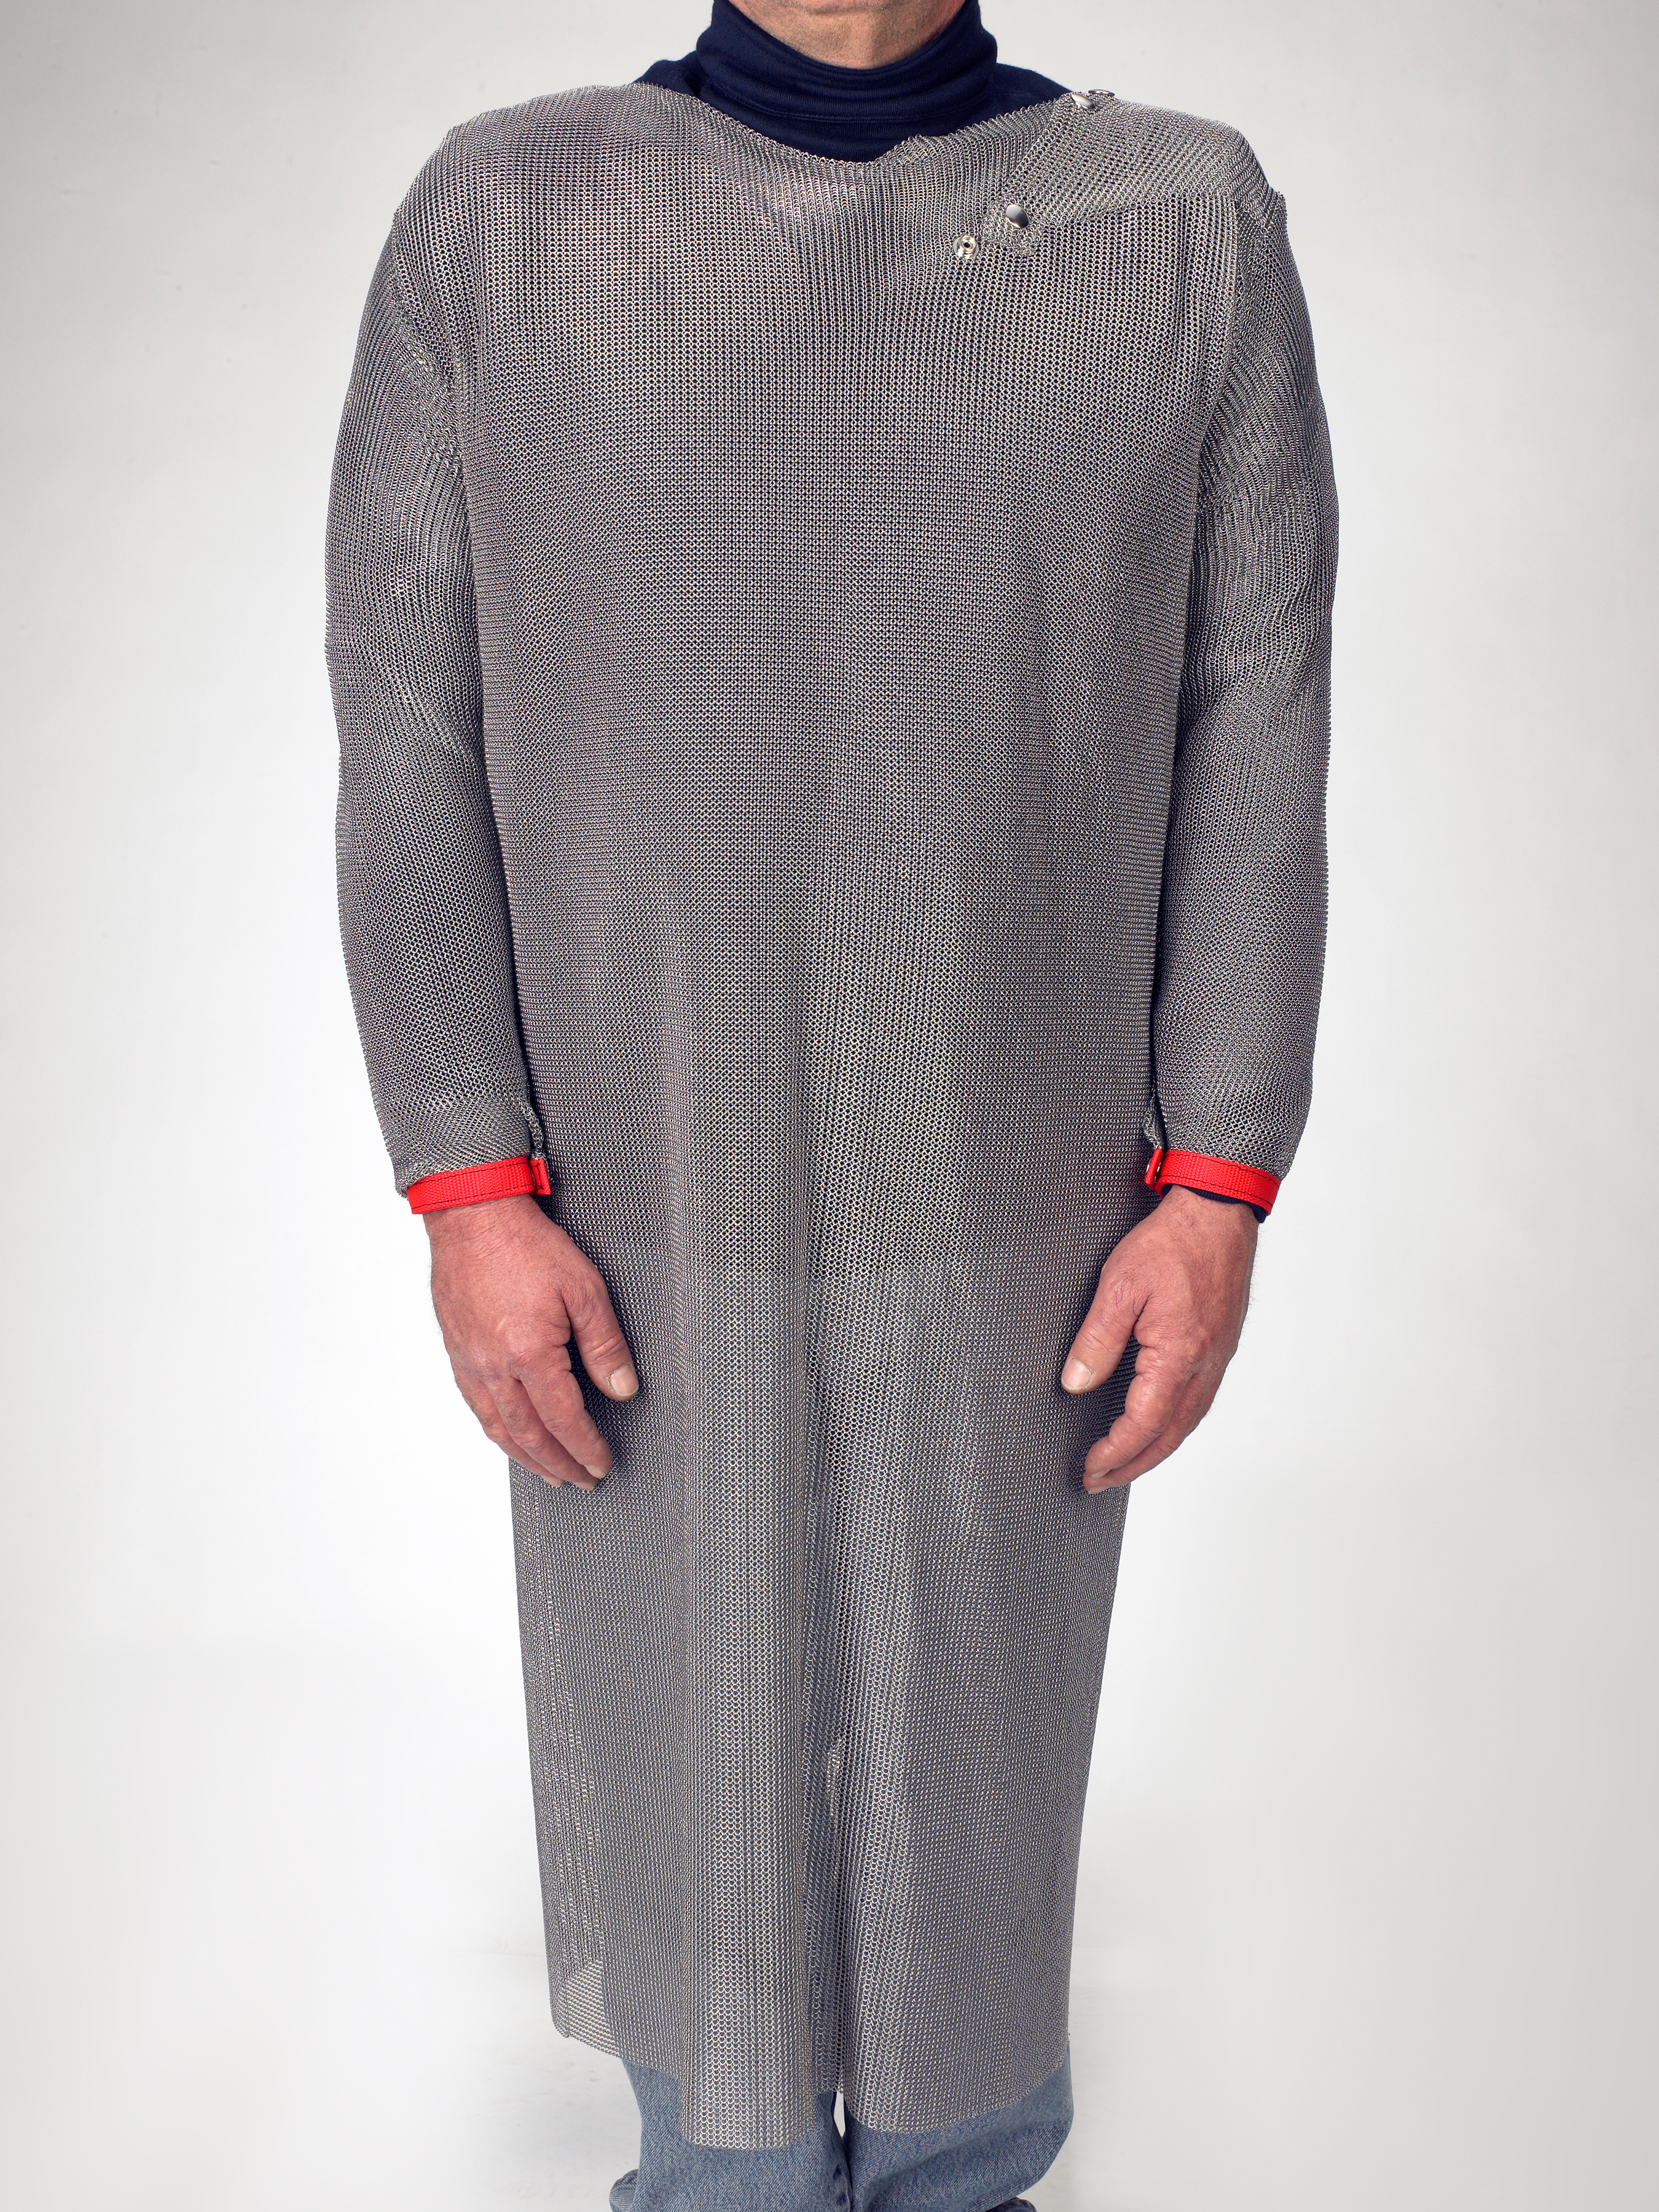 https://www.mdsassociates.com/content/images/Apparel/USM-4300_tunic_front_view.jpg